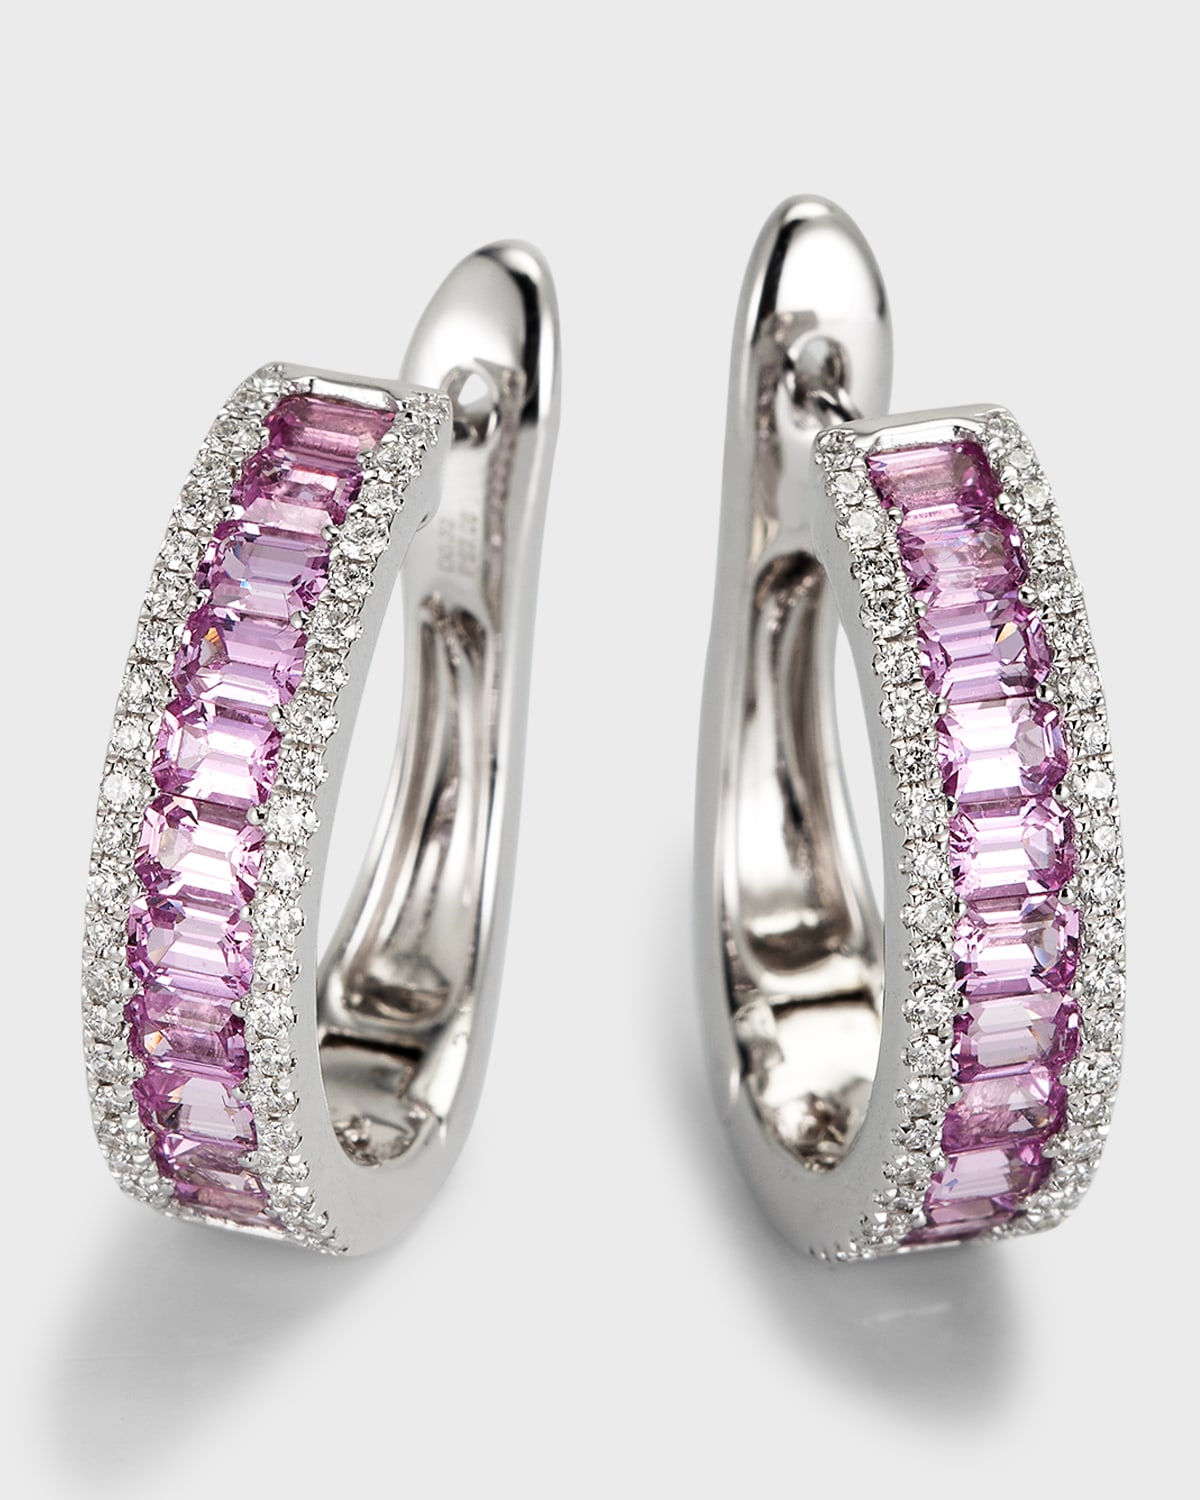 18K White Gold Earrings with Pink Sapphires and Diamonds